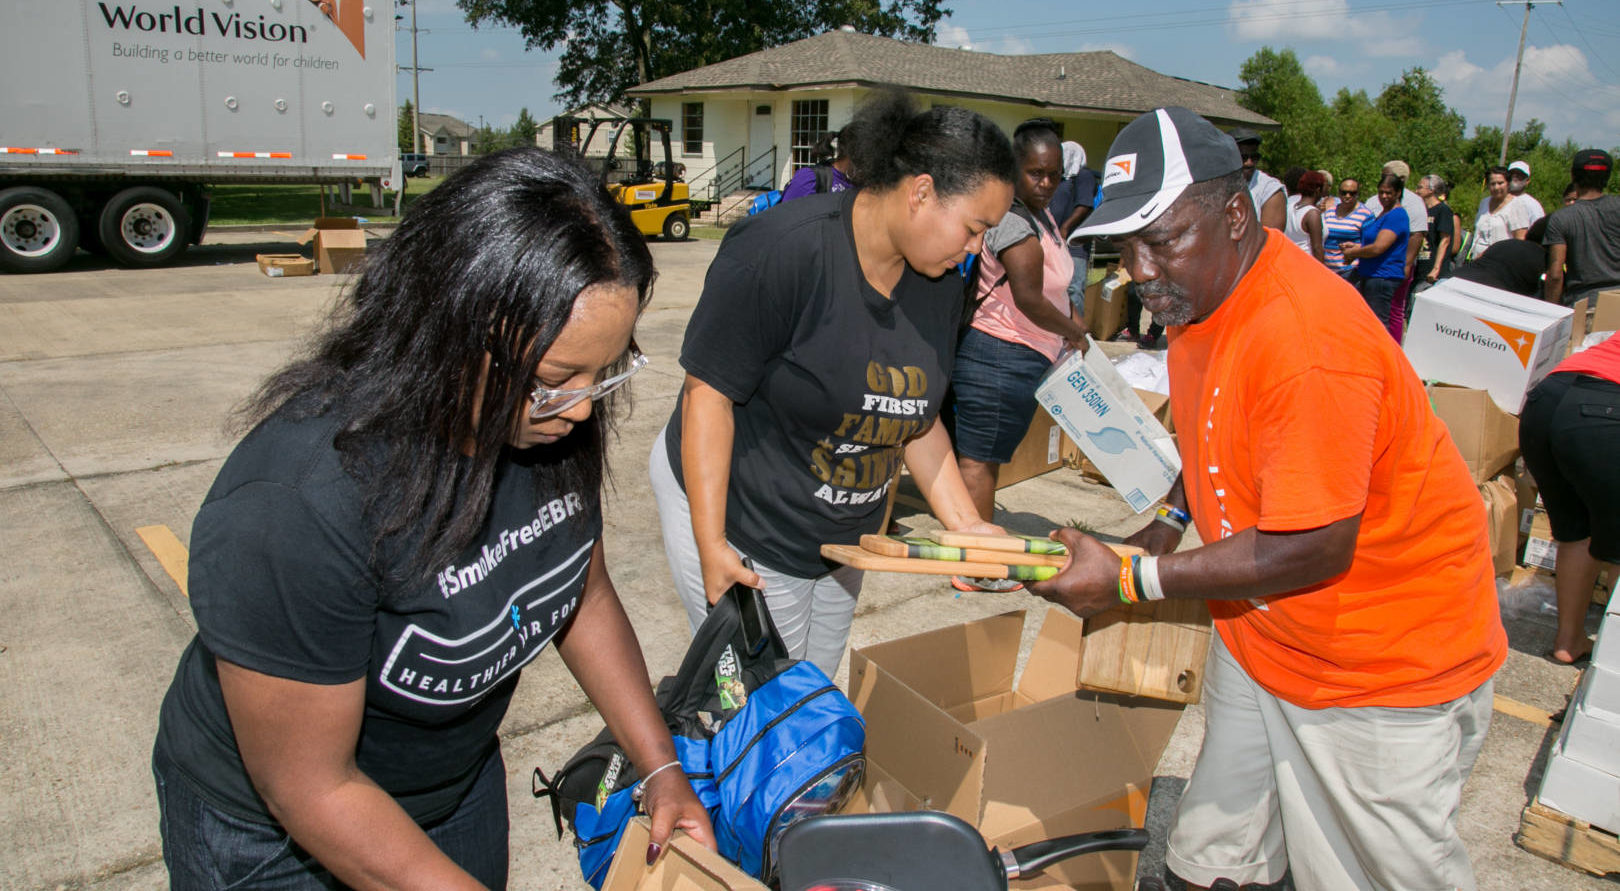 World Vision’s Antonio Evans, right, and volunteers help distribute relief supplies to local families impacted by flooding Sept. 2 at the Greater Antioch Full Gospel Baptist Church in Baton Rouge, La. (©2016 Kathy Anderson/Genesis Photos)